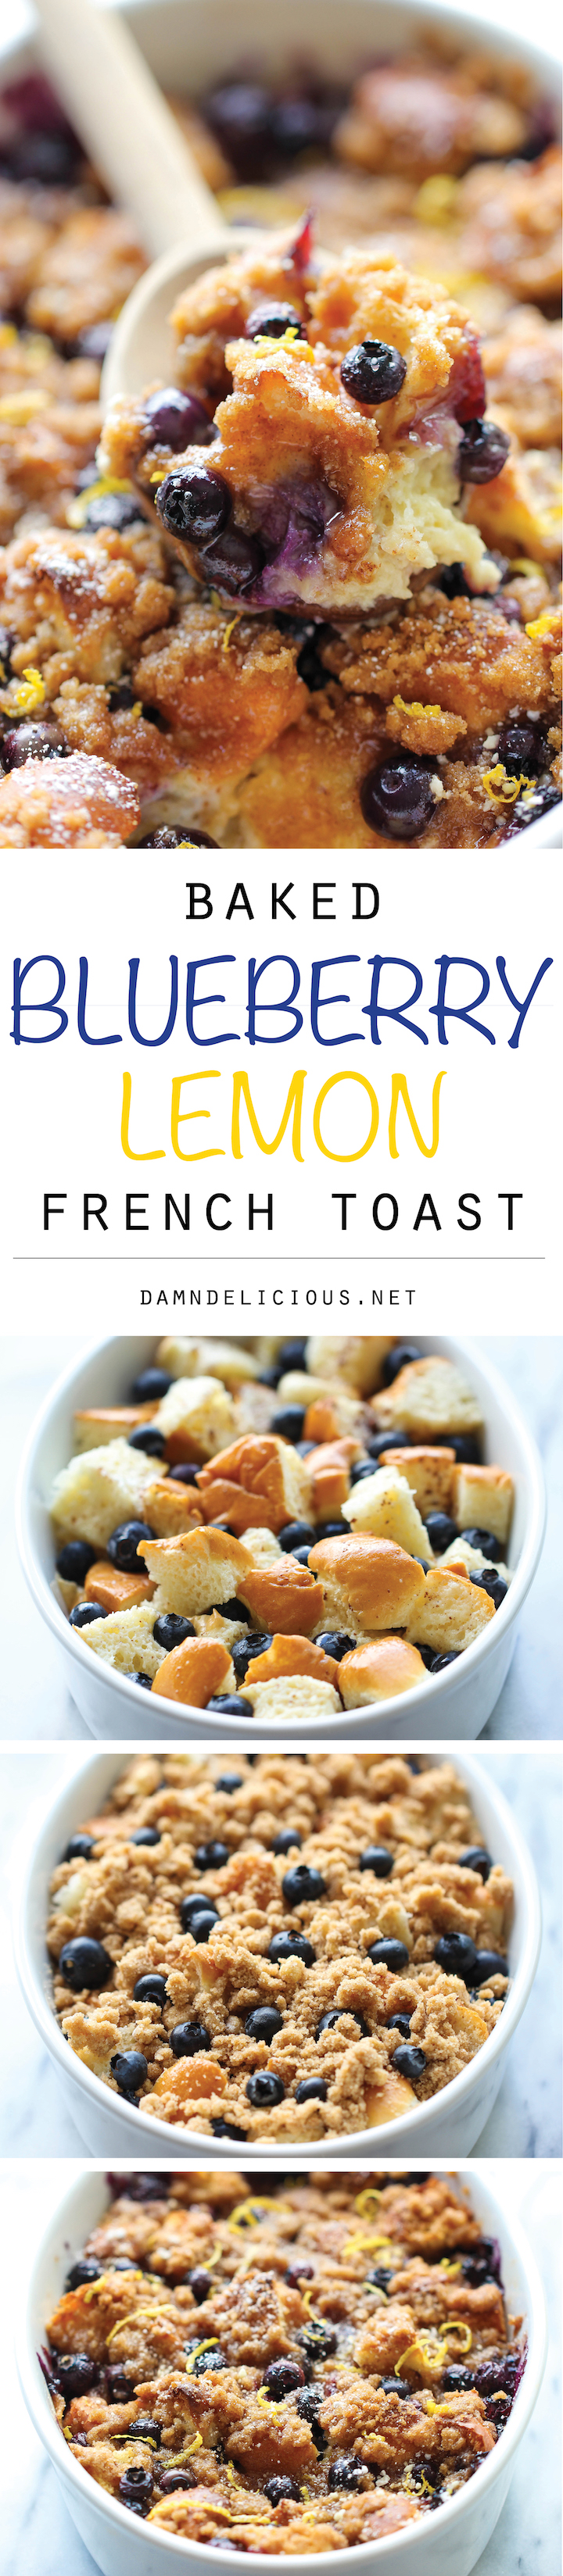 Baked Blueberry Lemon French Toast - Amazingly sweet and scrumptious make-ahead french toast using King's Hawaiian bread!